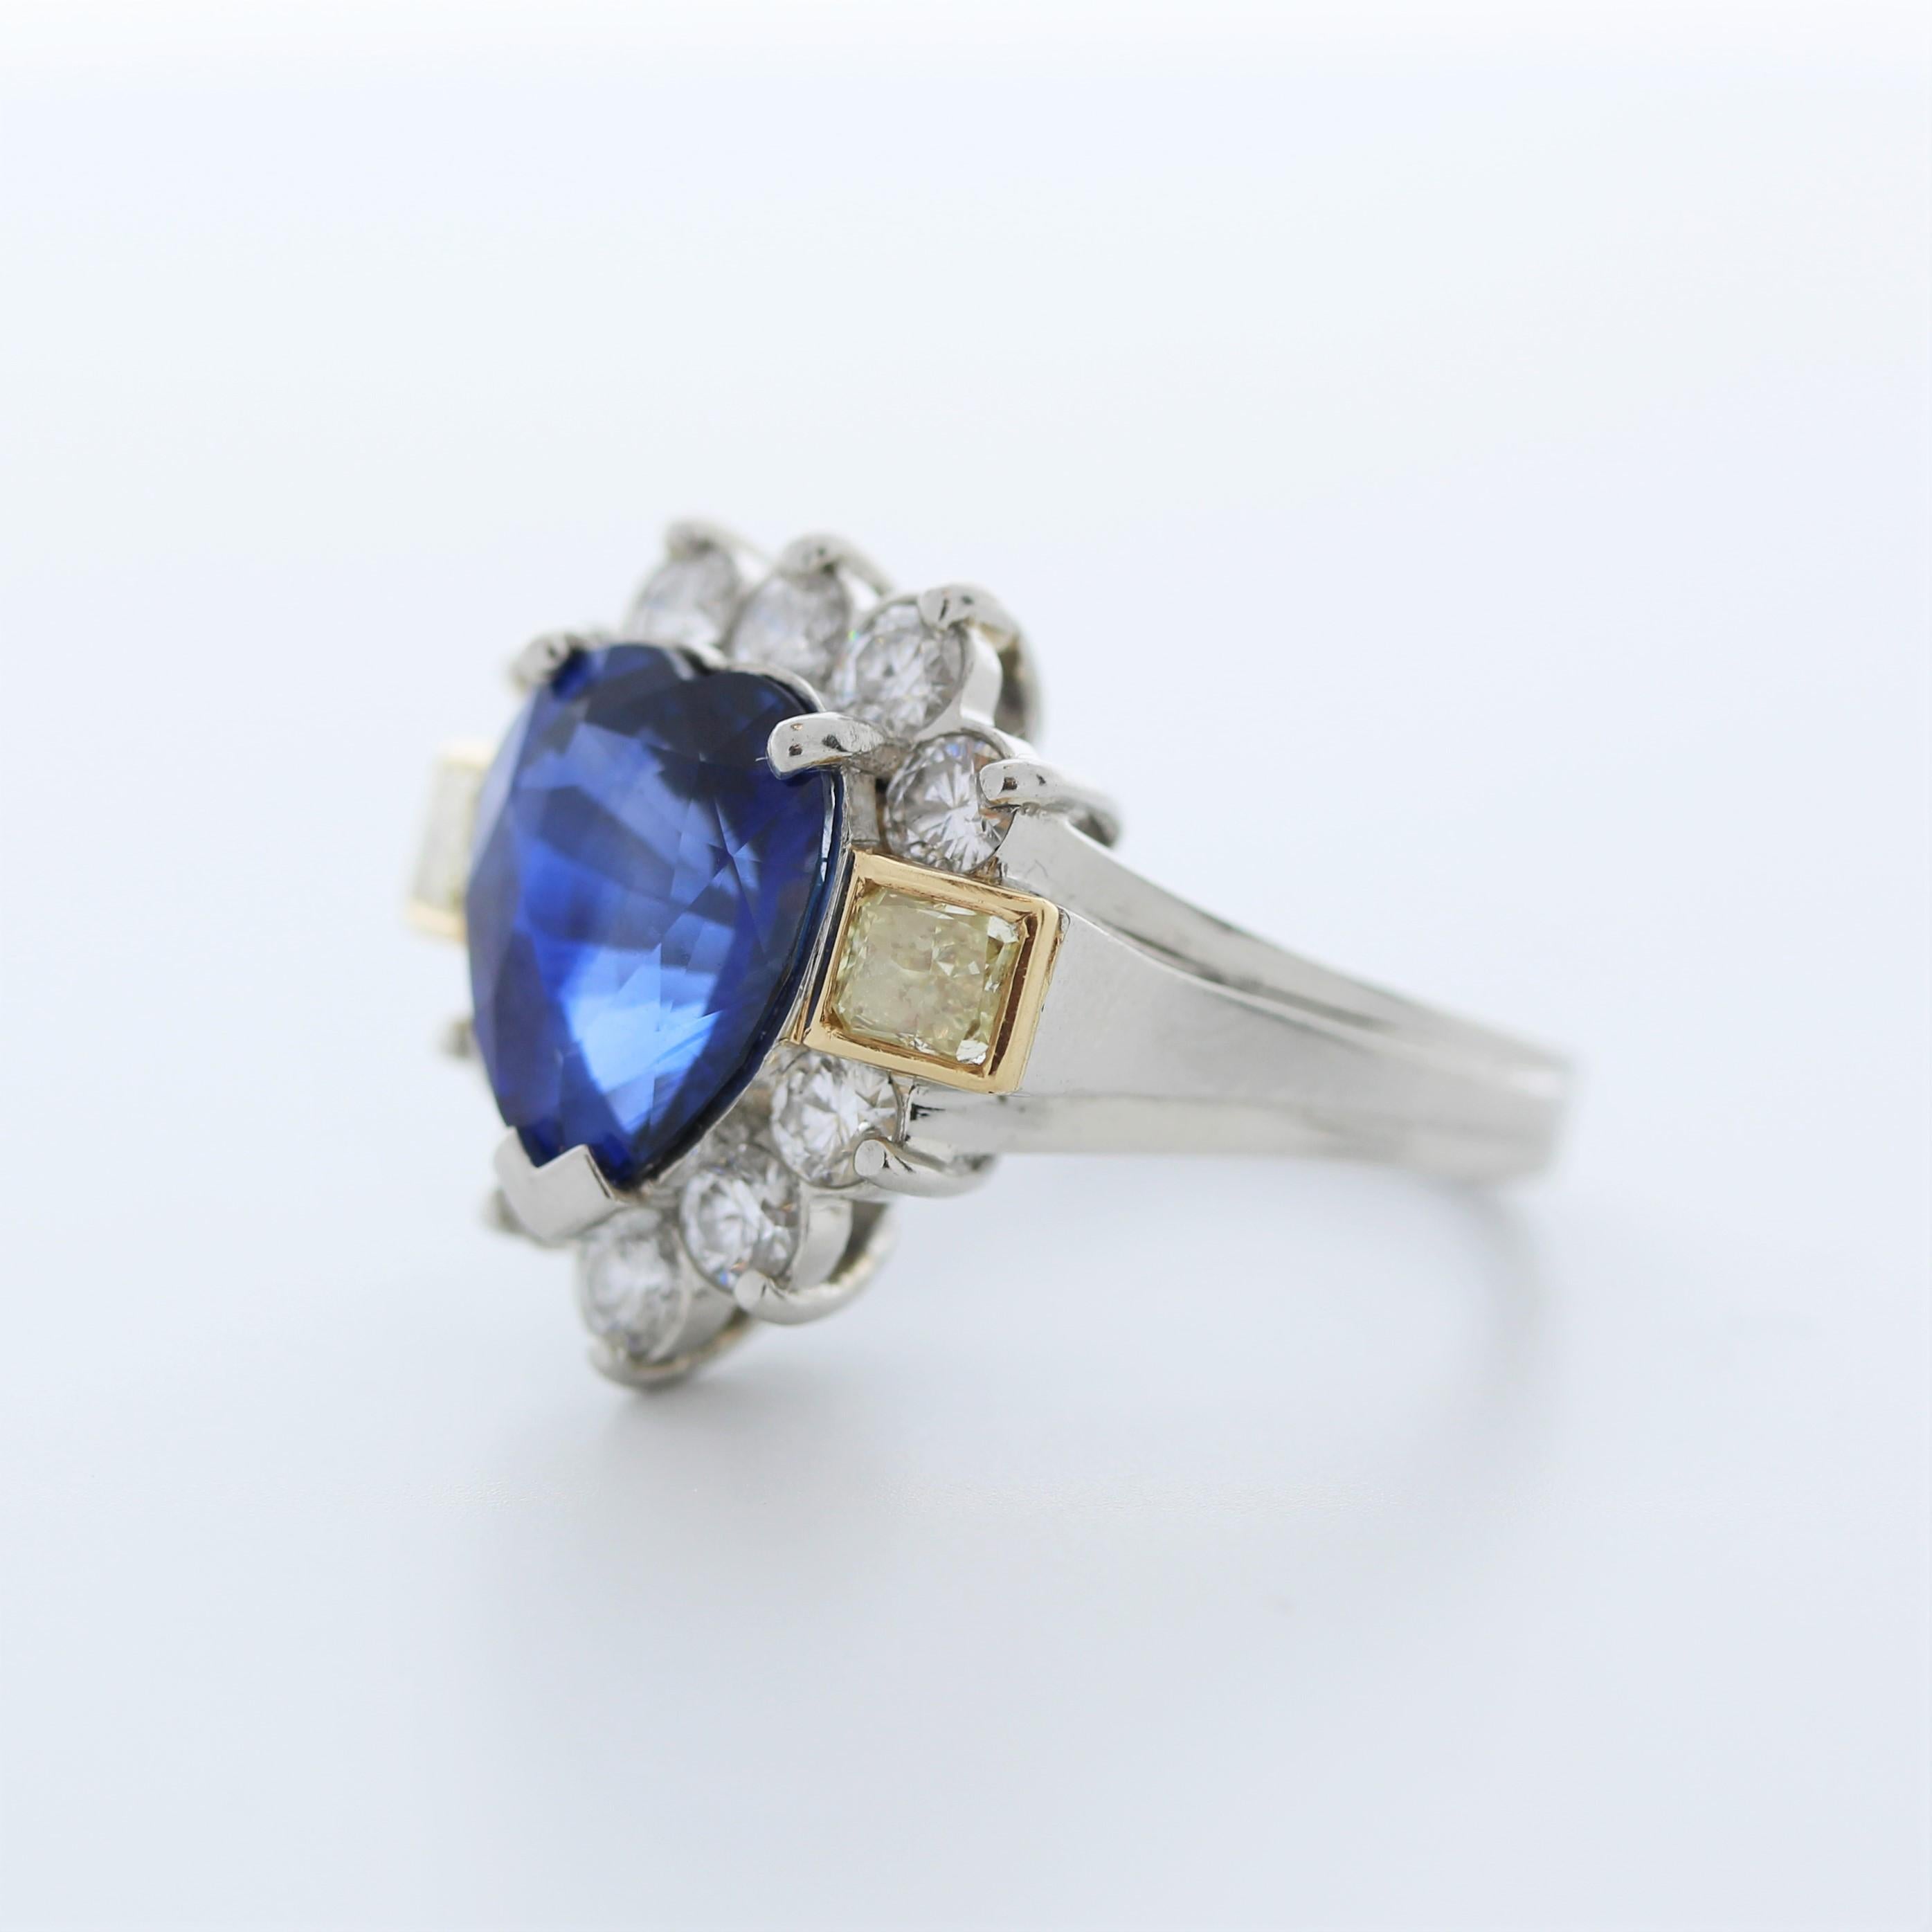 A fashion ring featuring a combination of platinum and 18k gold with a main stone of a certified 4.99 carat heart-shaped blue sapphire, accompanied by 12 round-cut diamonds totaling 1.5 carats as side stones, would be an exquisite and high-quality